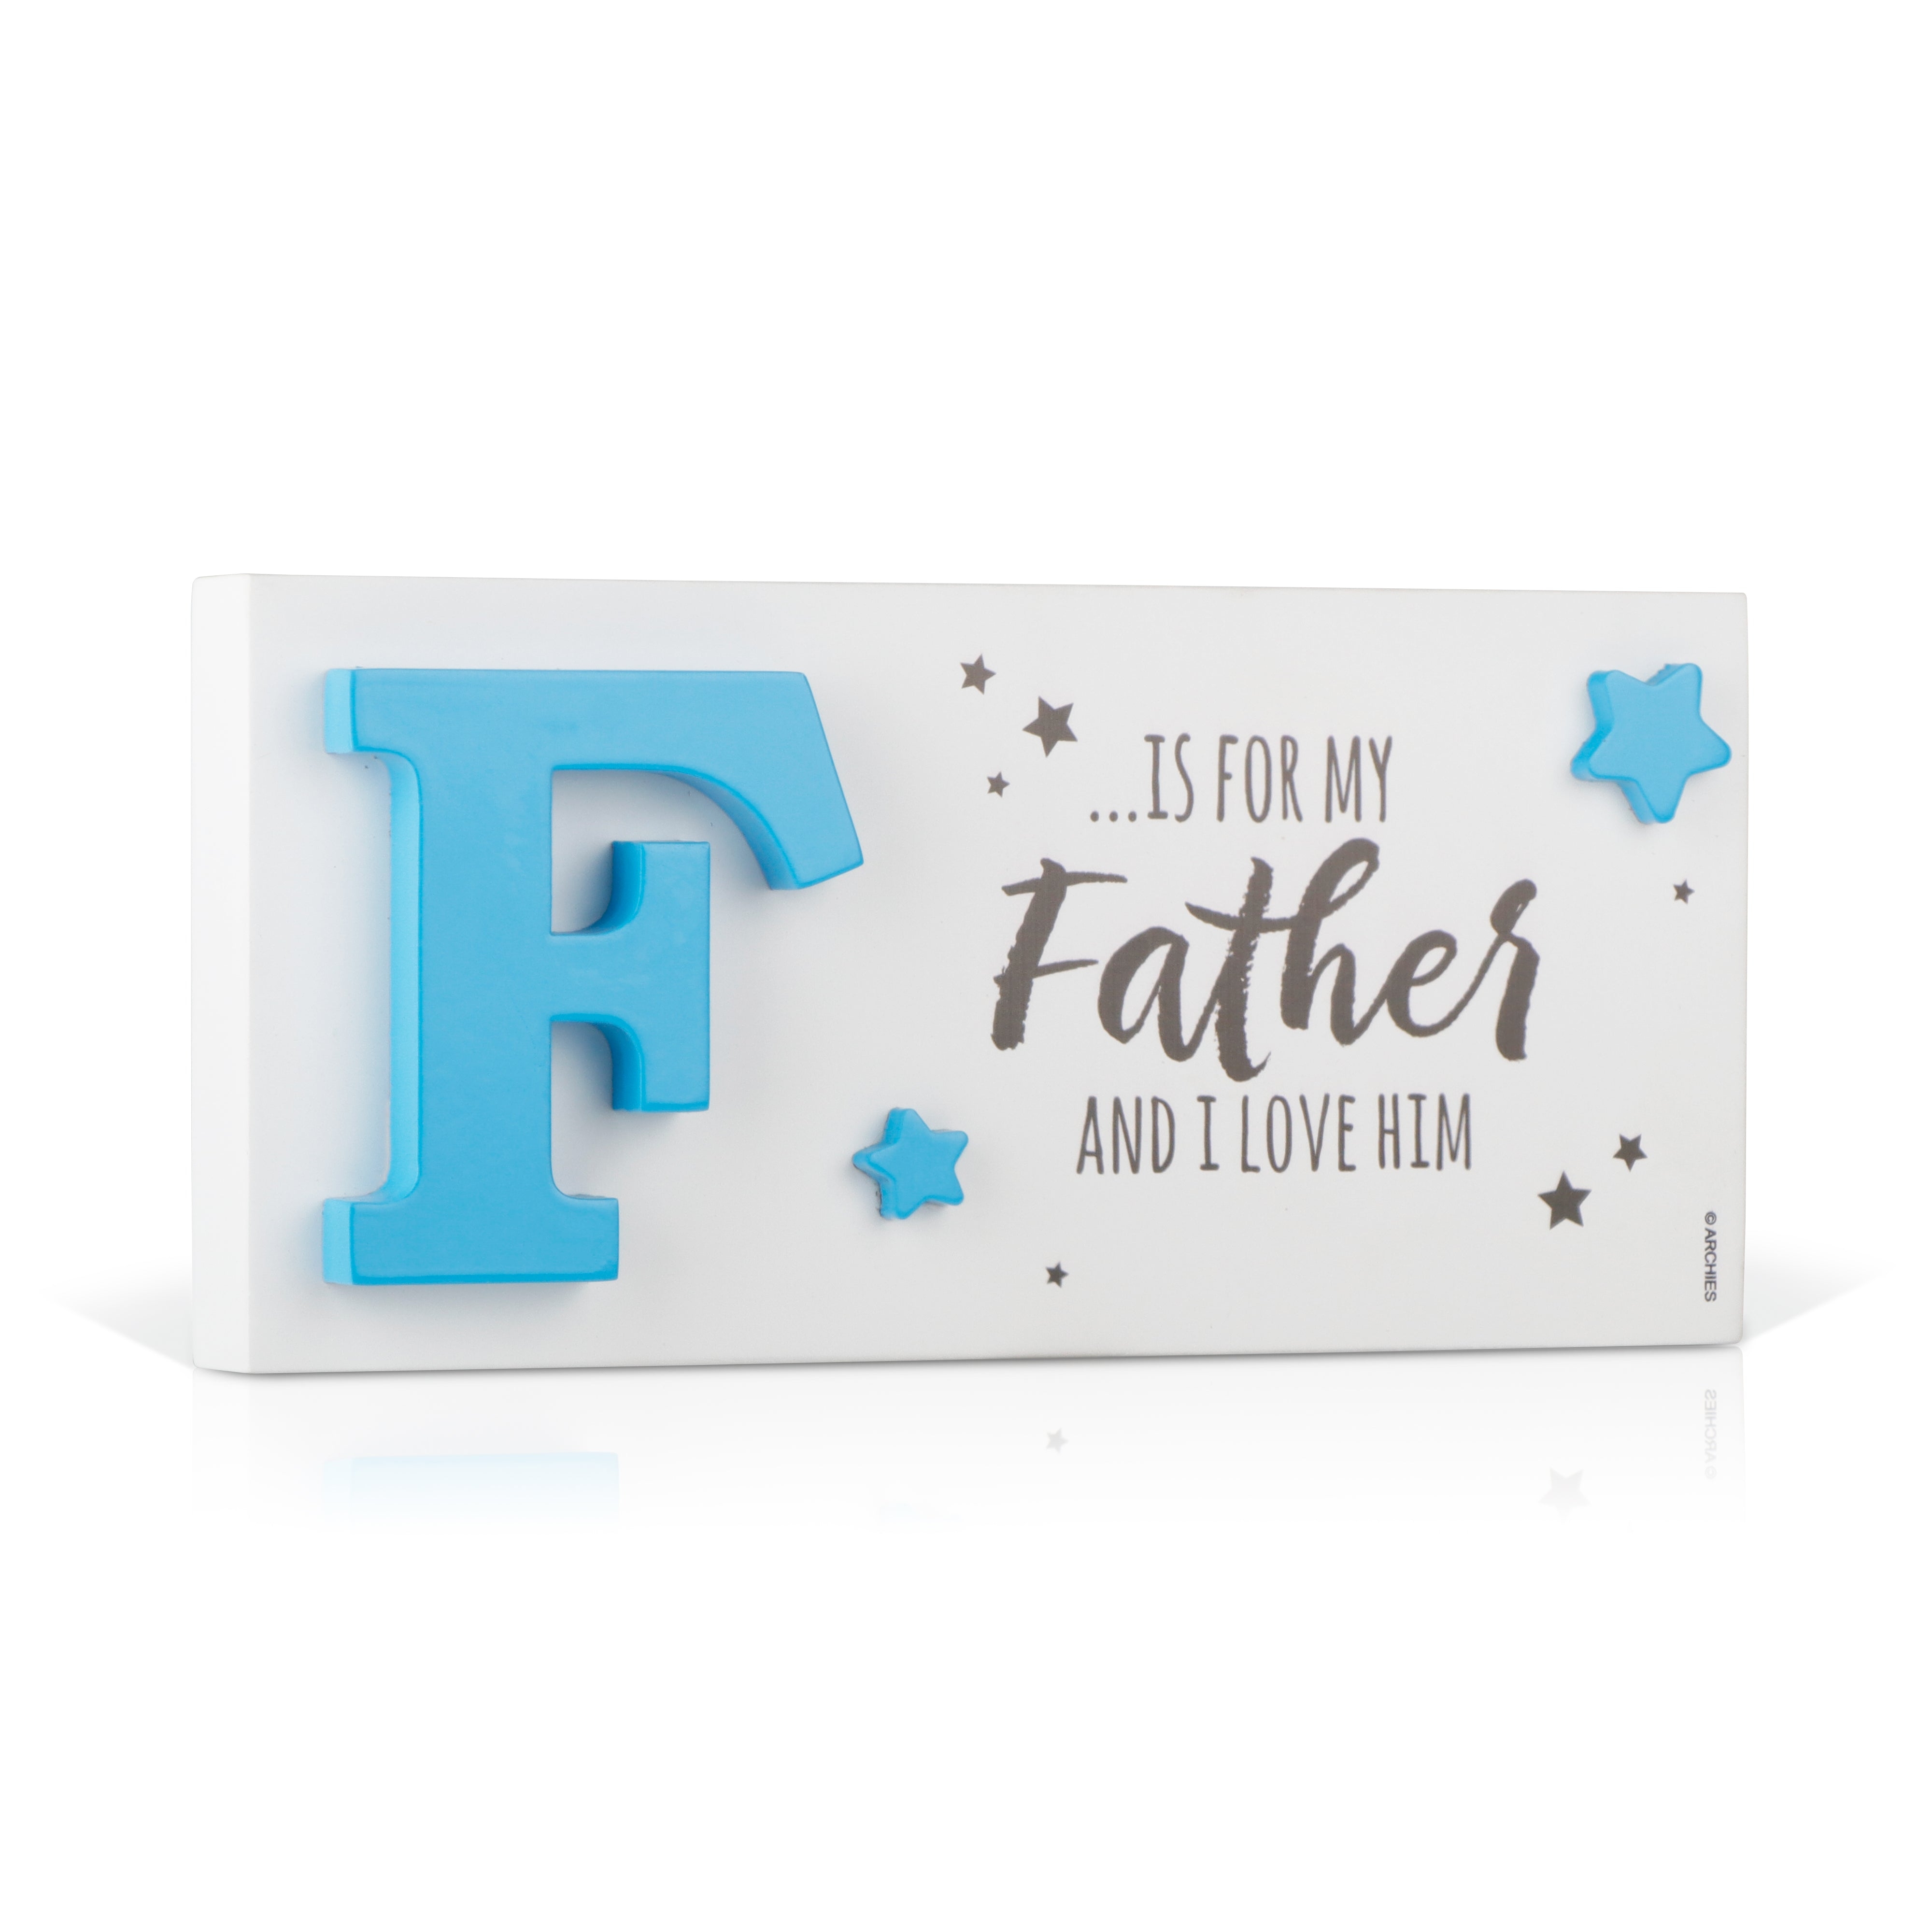 Archies | Archies KEEP SAKE Father's Day Gift Combo with Ceramic Mug and Elevated Initial Quotation - with a FREE GREETING CARD 5